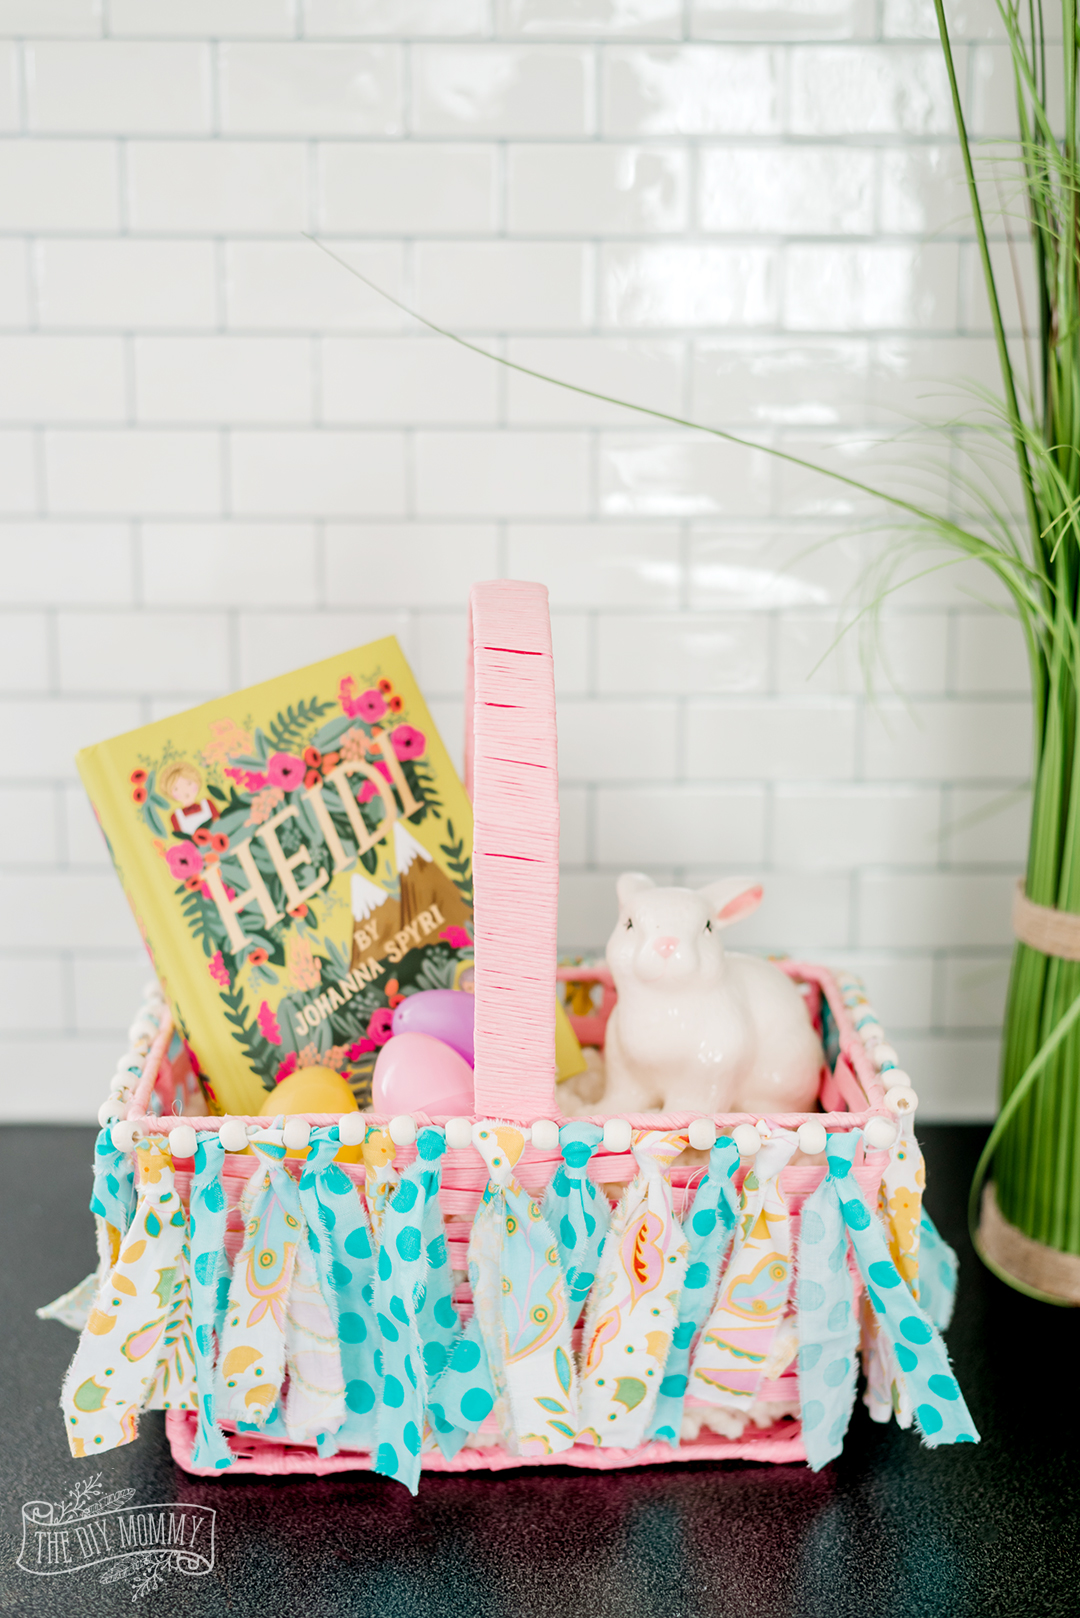 Learn how to make a DIY scrap fabric garland to decorate an Easter basket or use as wall decor